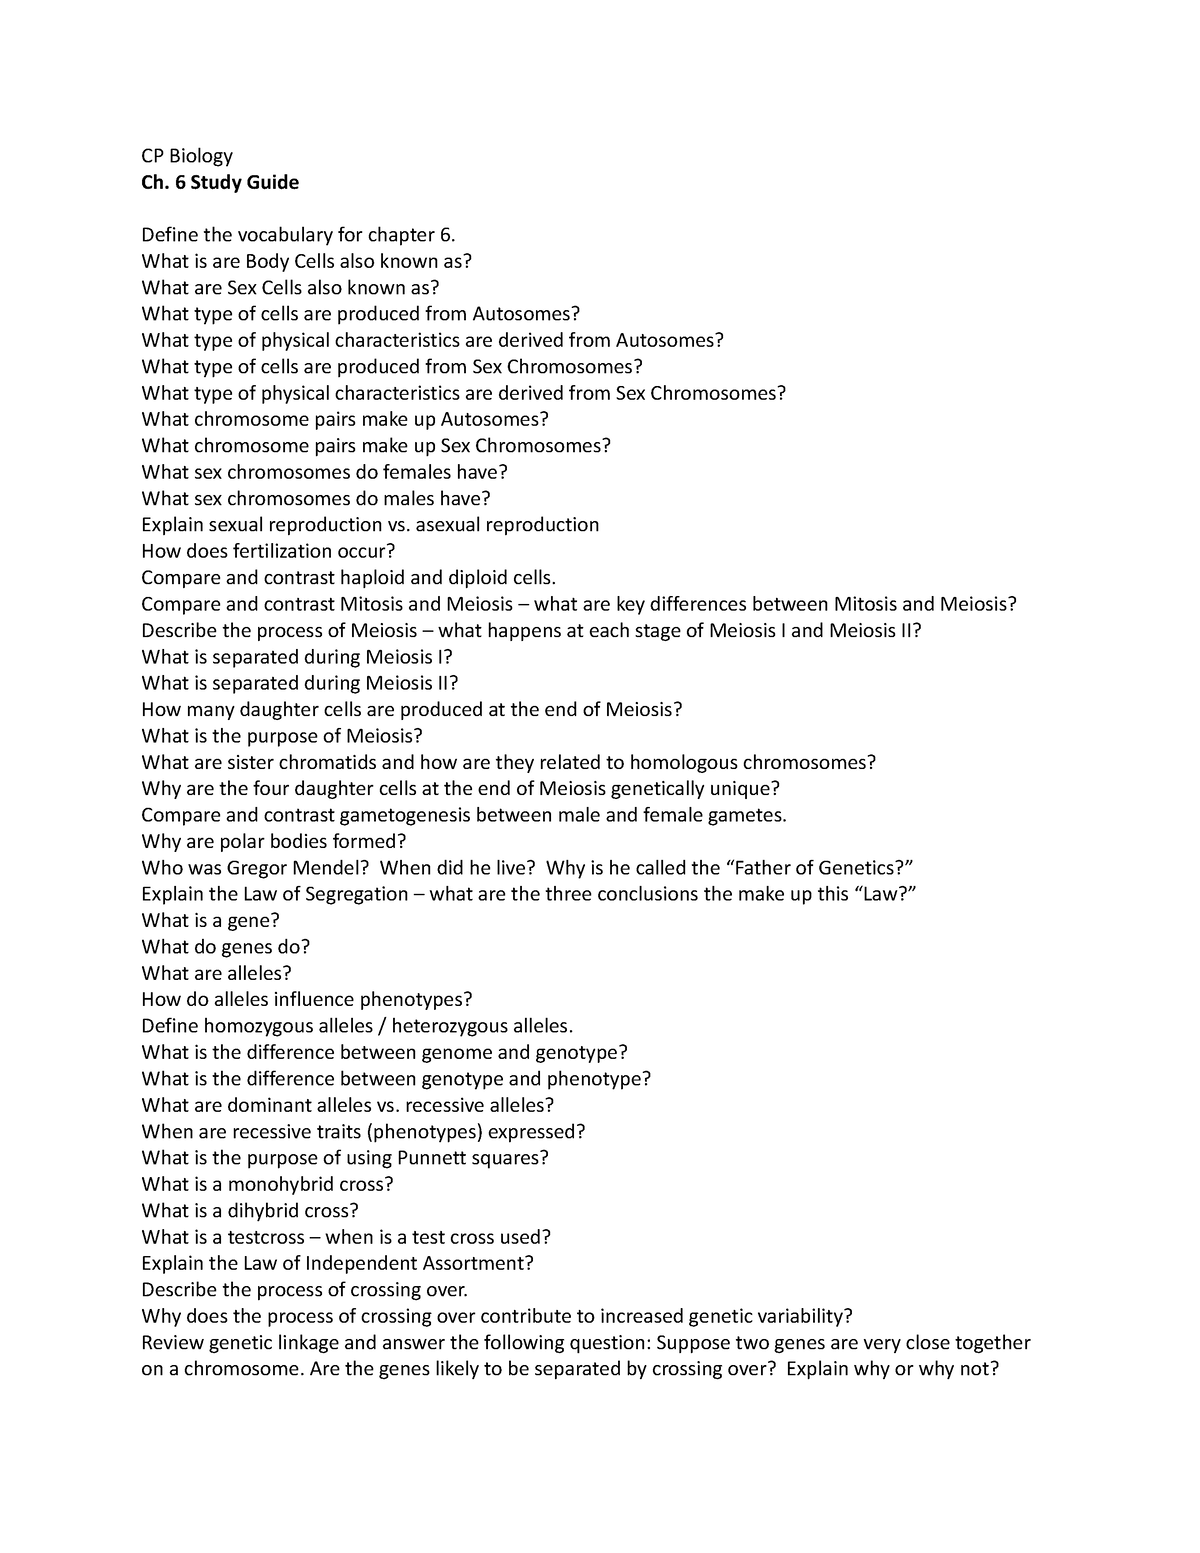 Ch - I just want to use it for notes - CP Biology Ch. 6 Study Guide ...